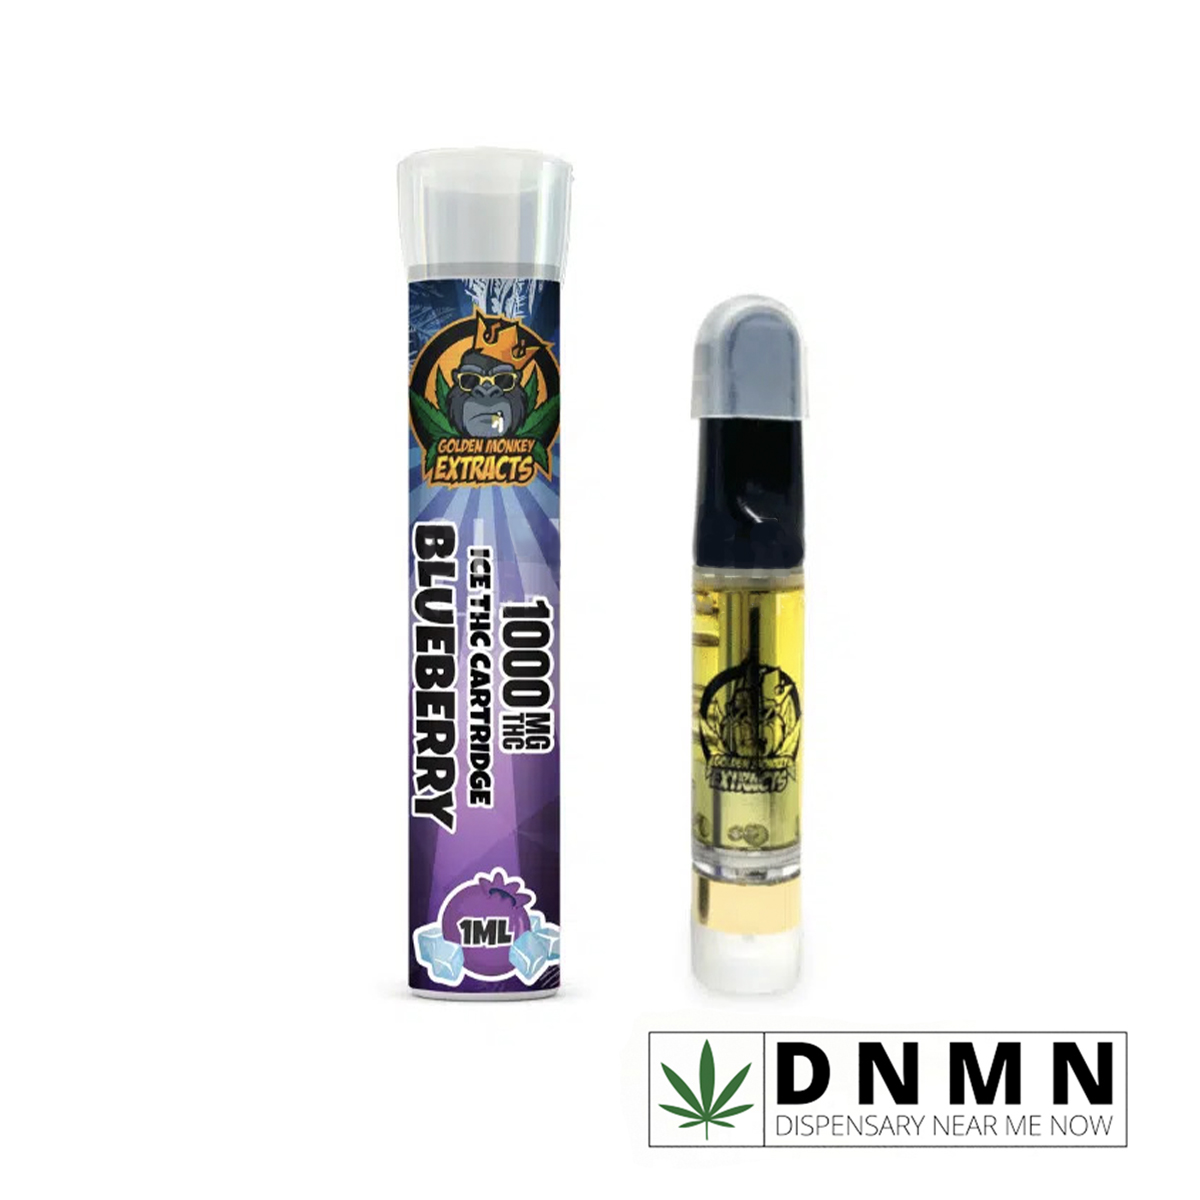 Golden Monkey Extracts - ICED Blueberry Cartridge | Buy Vapes Online | Dispensary Near Me